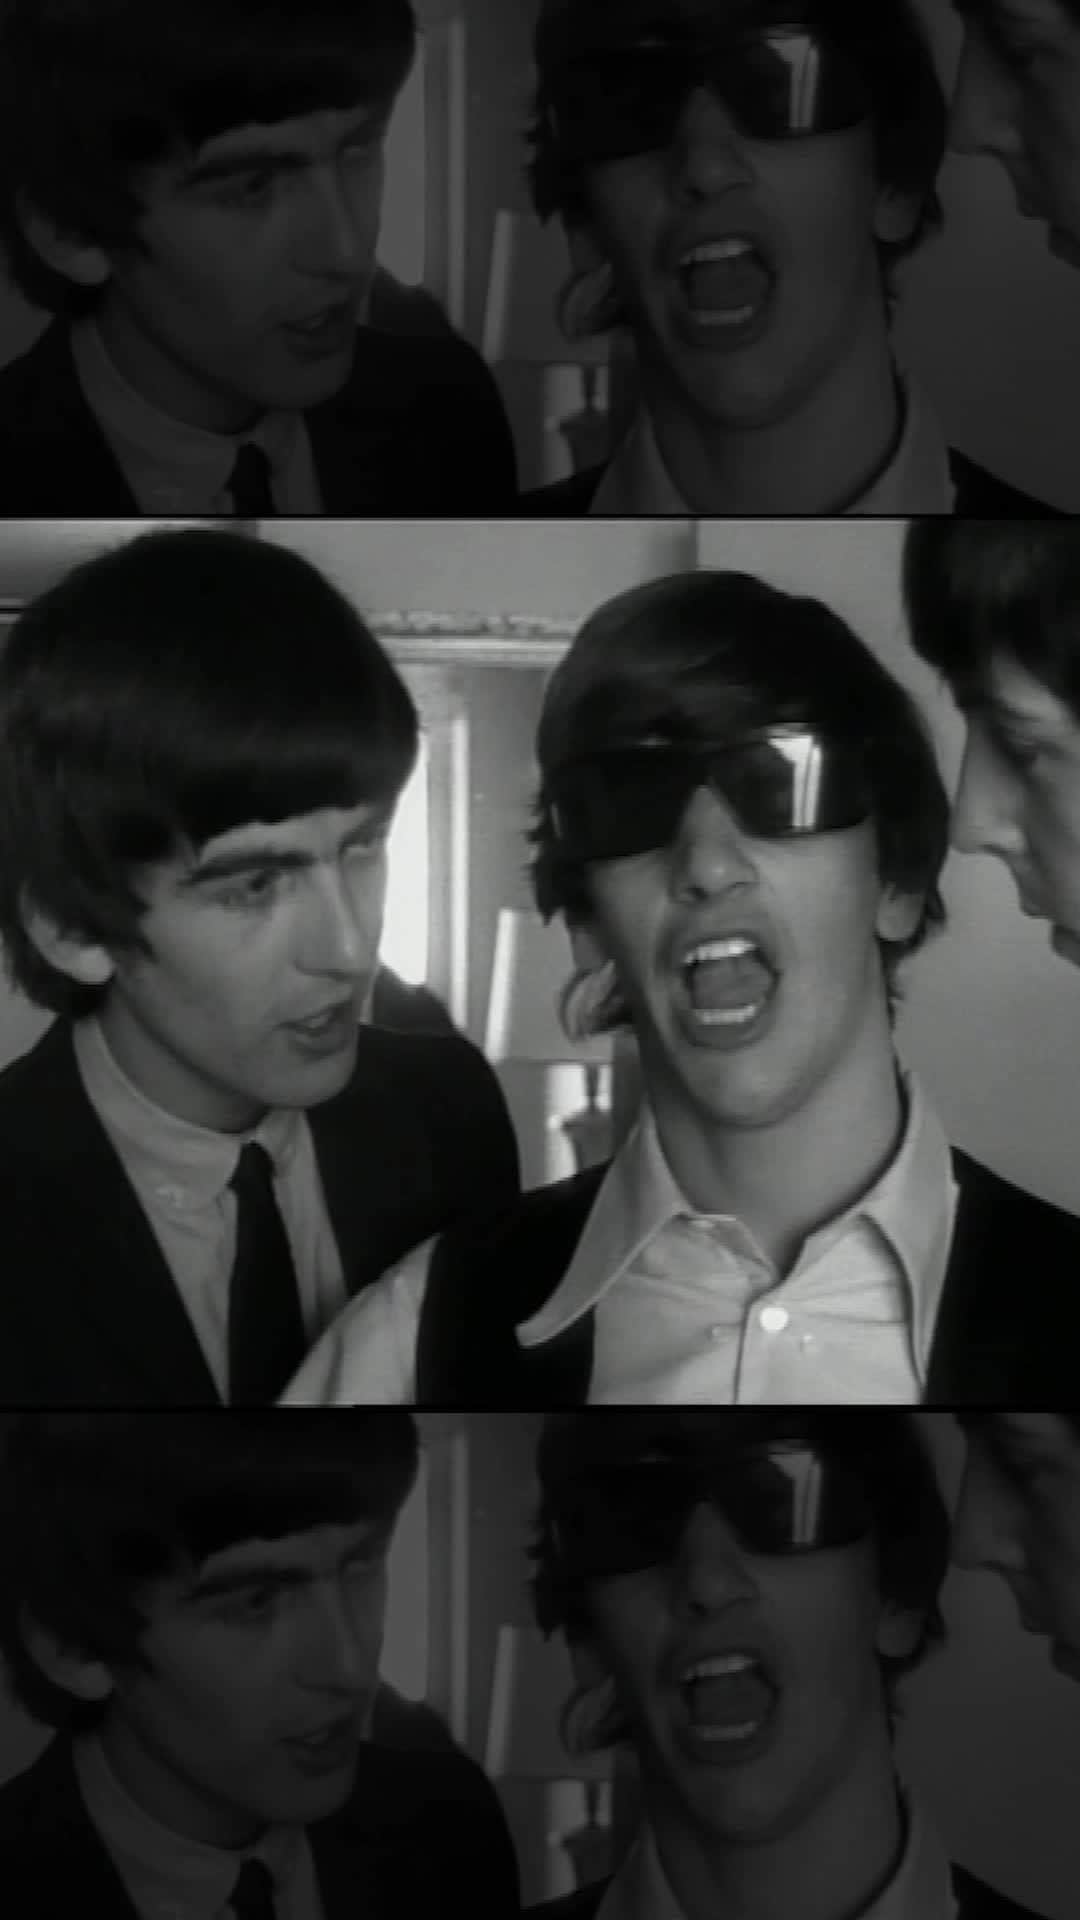 The Beatlesのインスタグラム：「From The Beatles: The First U.S. Visit documentary - the band in Miami, 1964.⁠ ⁠ #TheBeatles #1960s ⁠ ⁠ @ringostarrmusic @paulmccartney @georgeharrisonofficial @johnlennon ⁠ ⁠ Video © Apple Corps Ltd」